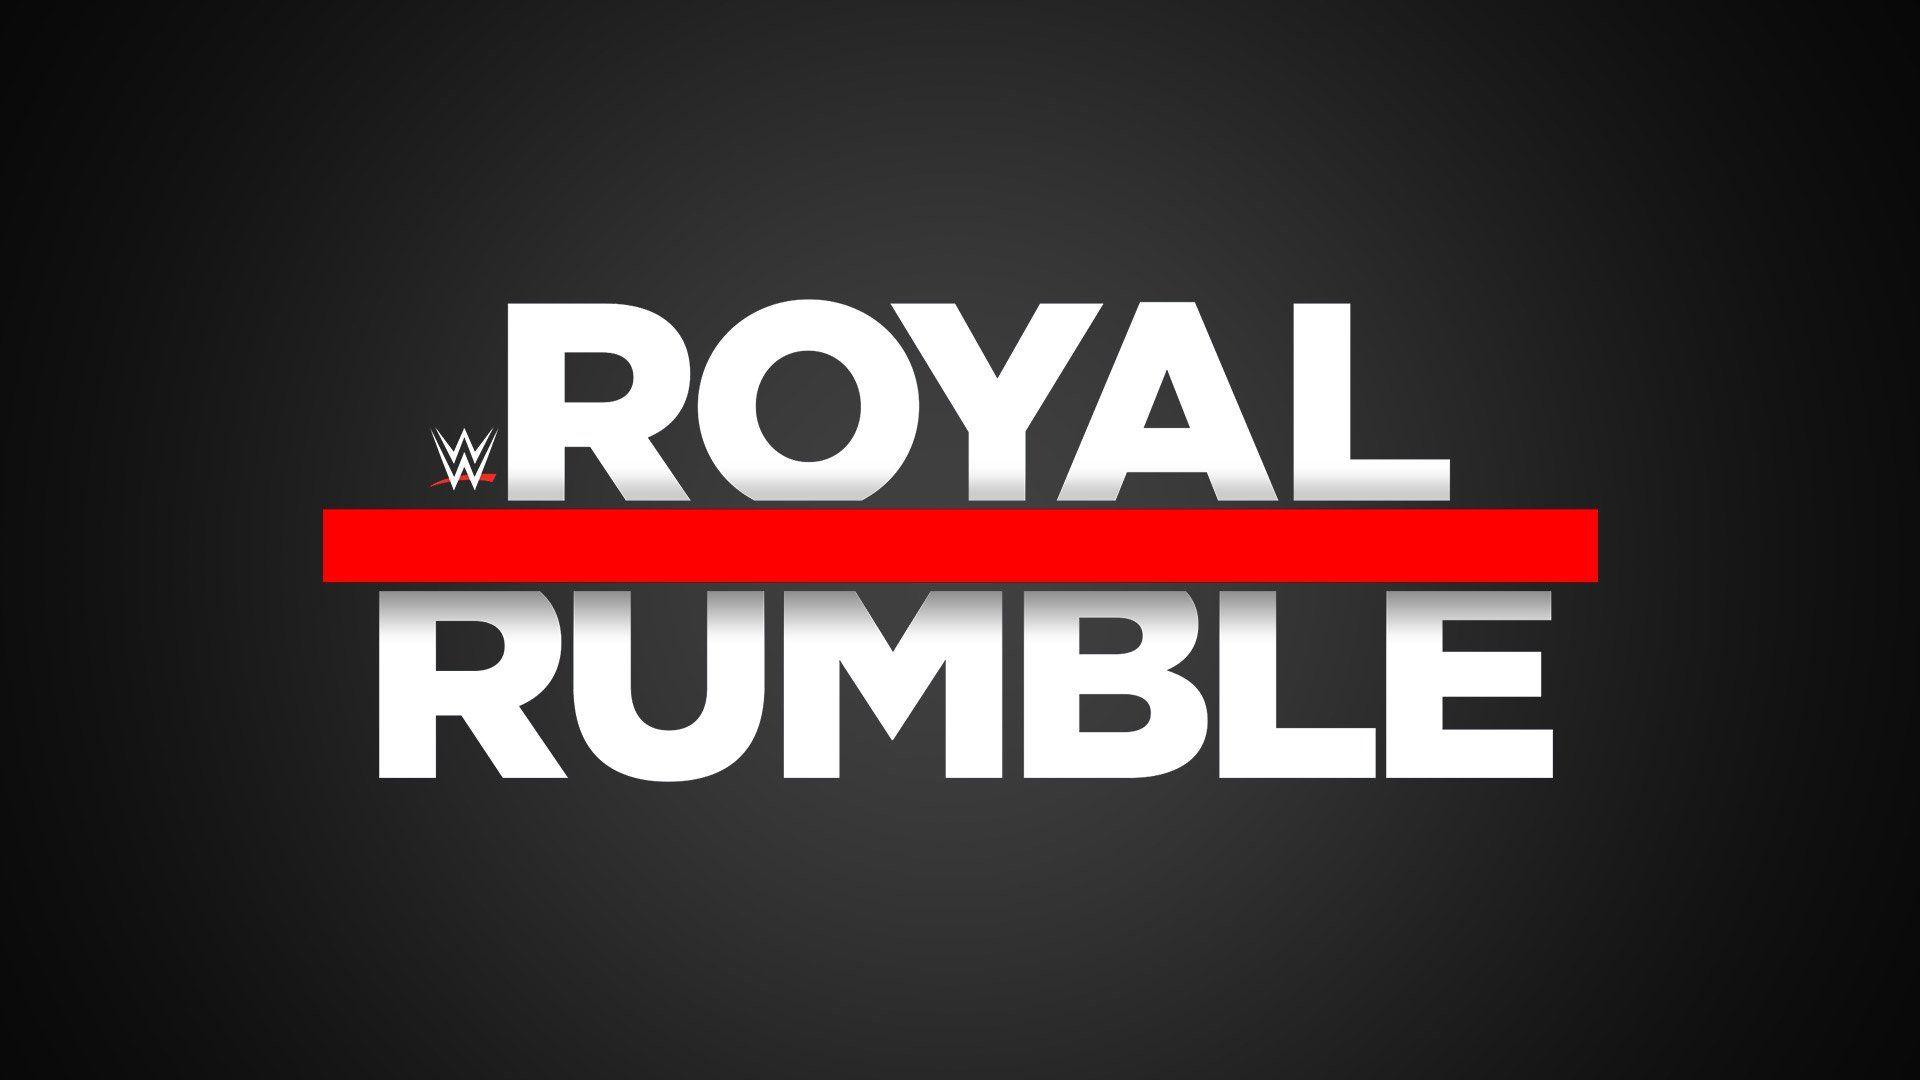 WWE Royal Rumble 2018: Matches, Rumors, and More. Den of Geek